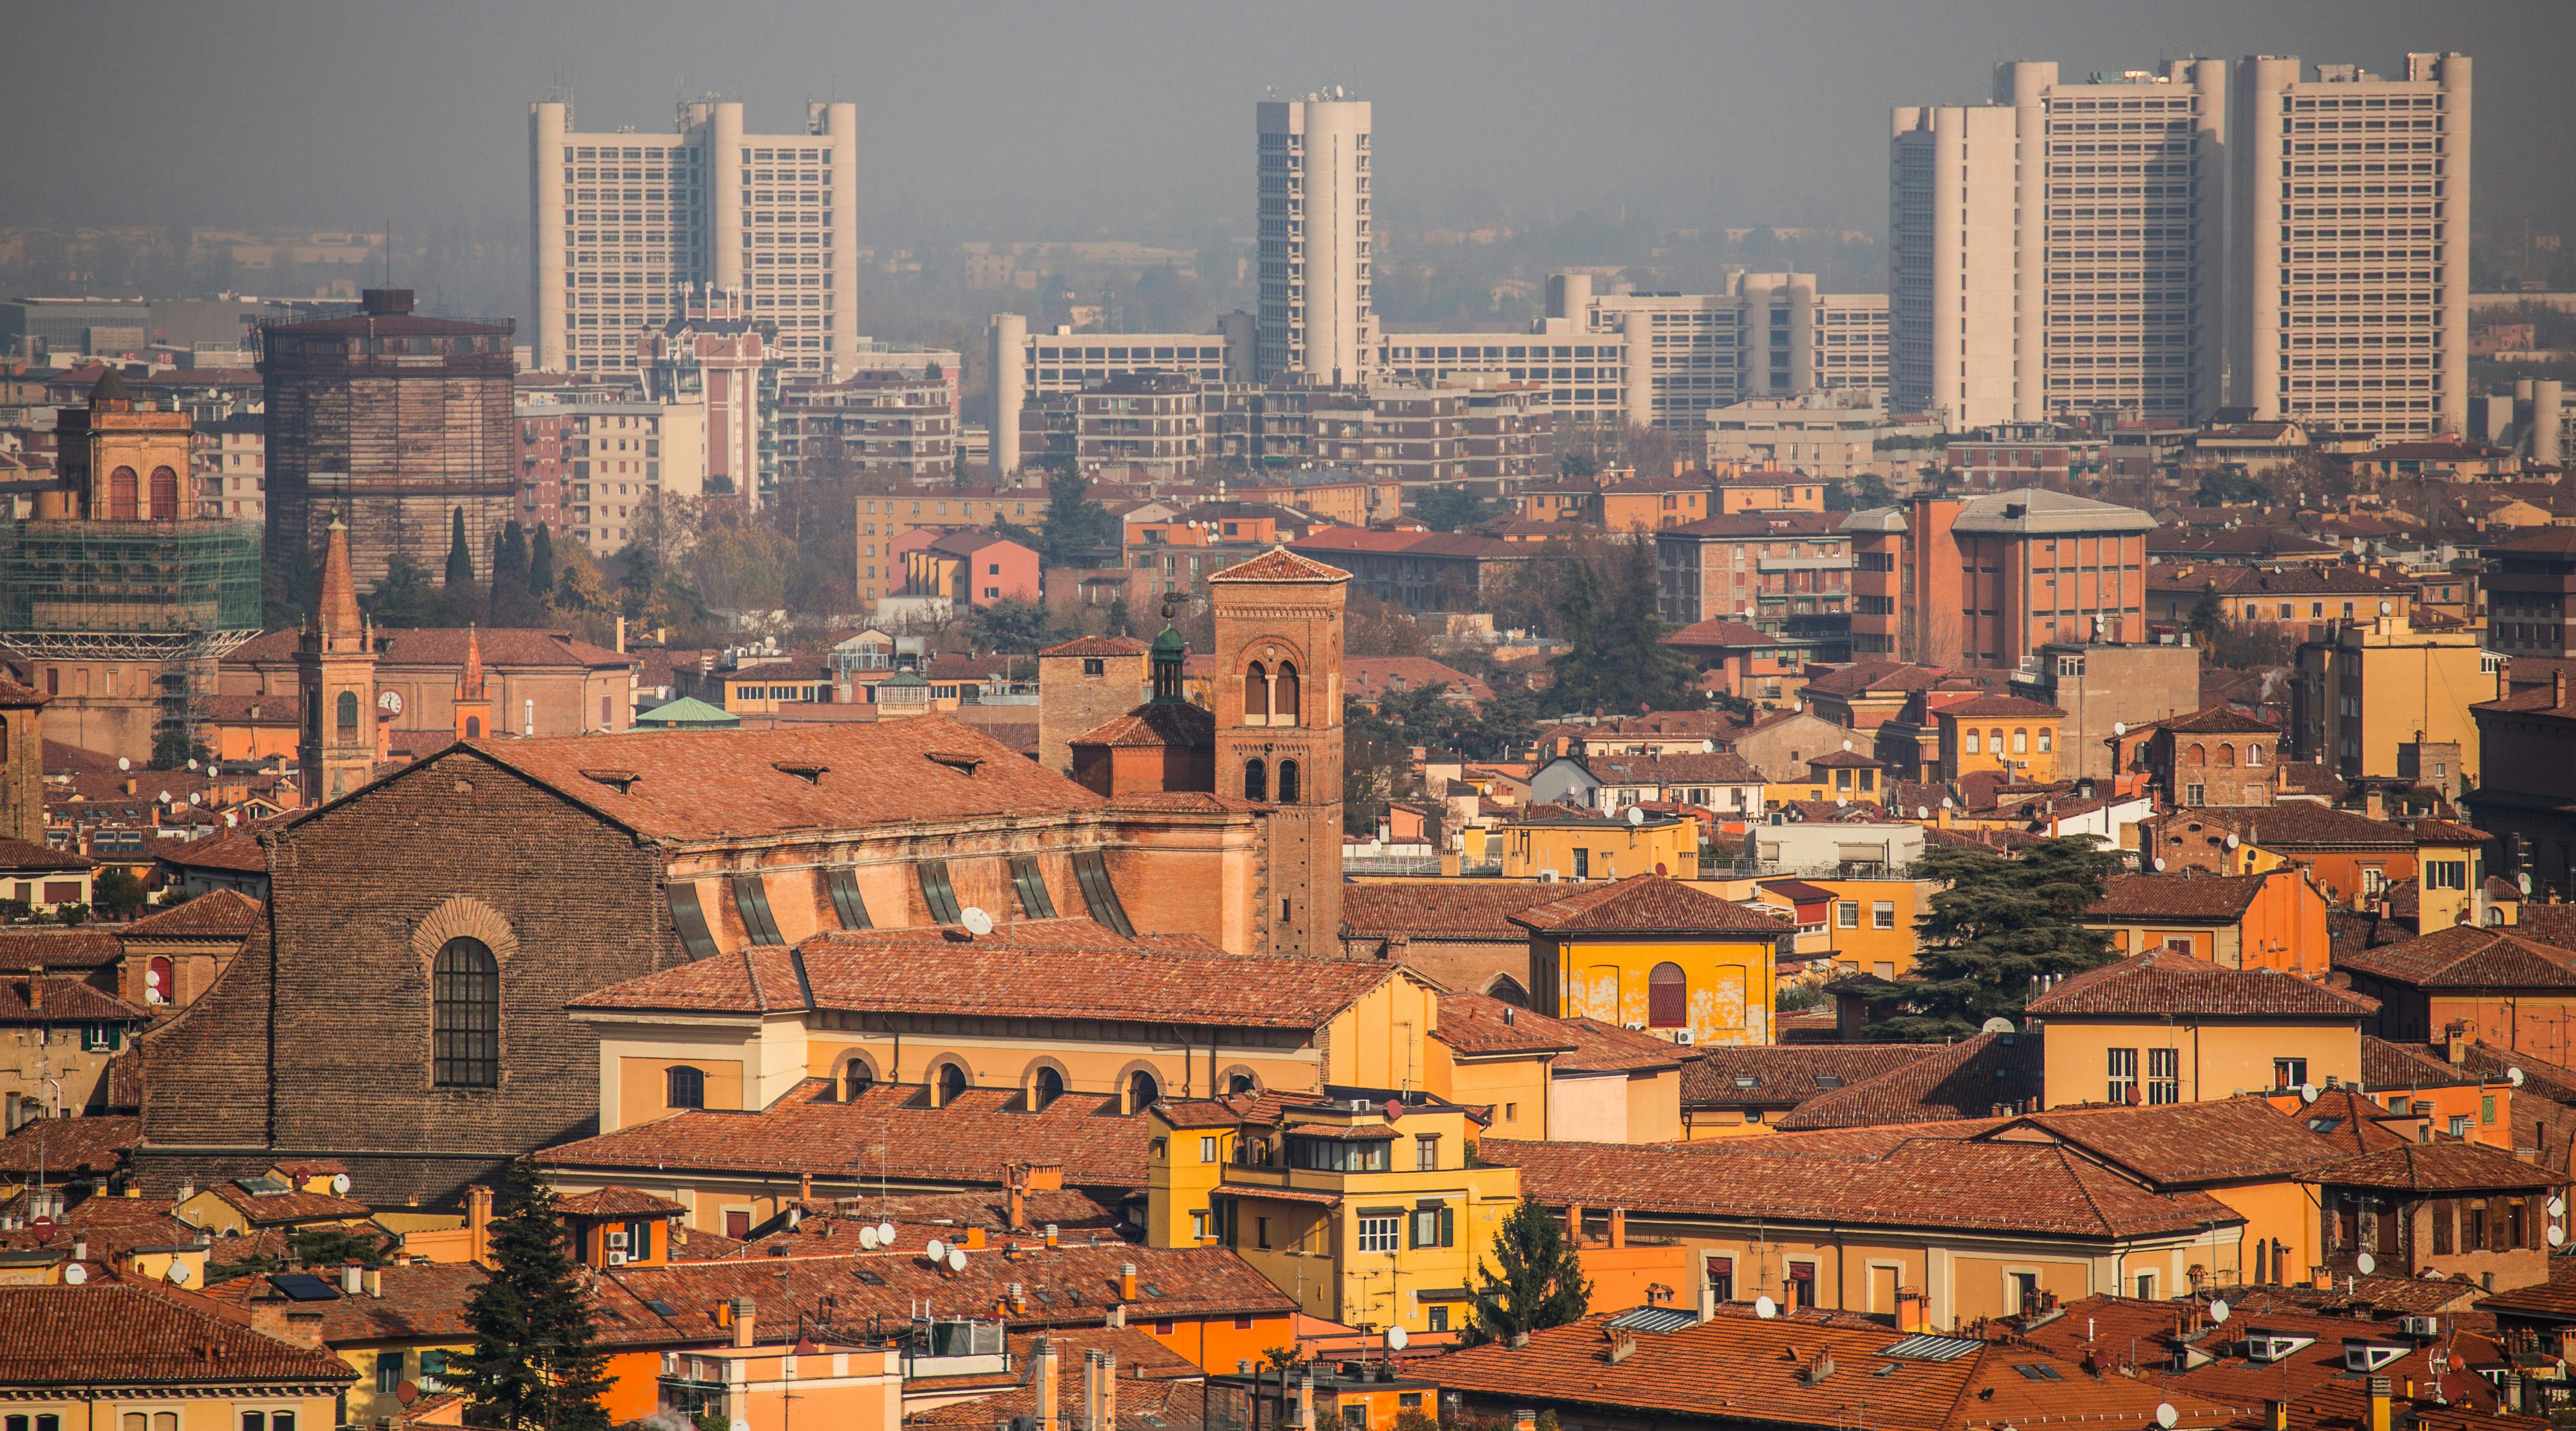 Center of Bologna seen from above